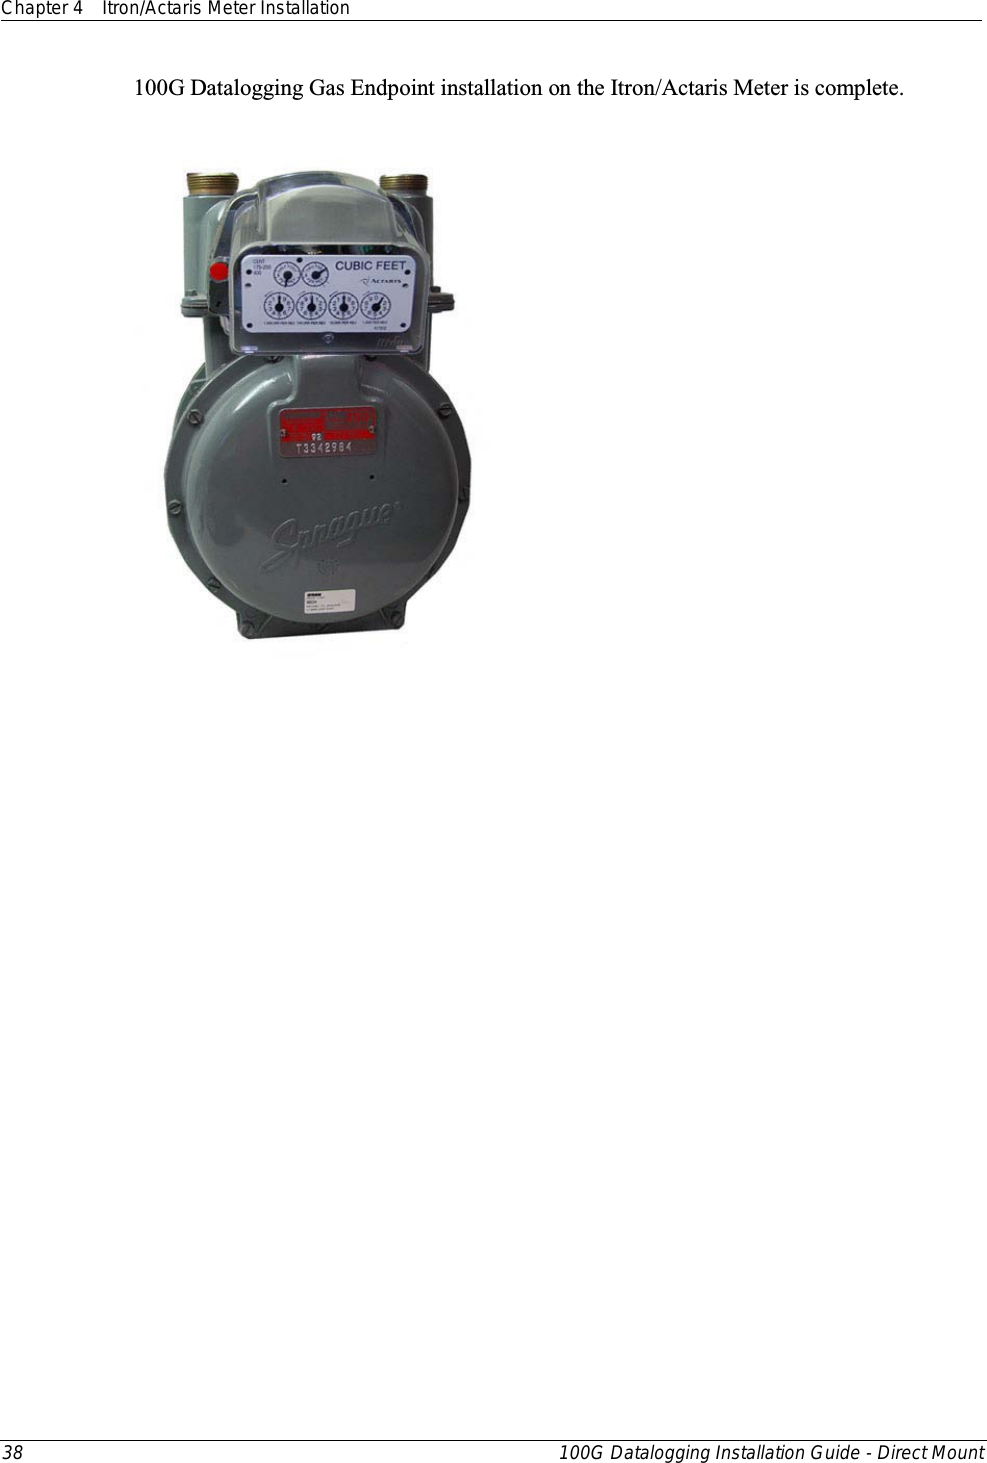 Chapter 4 Itron/Actaris Meter Installation  38 100G Datalogging Installation Guide - Direct Mount  100G Datalogging Gas Endpoint installation on the Itron/Actaris Meter is complete.   